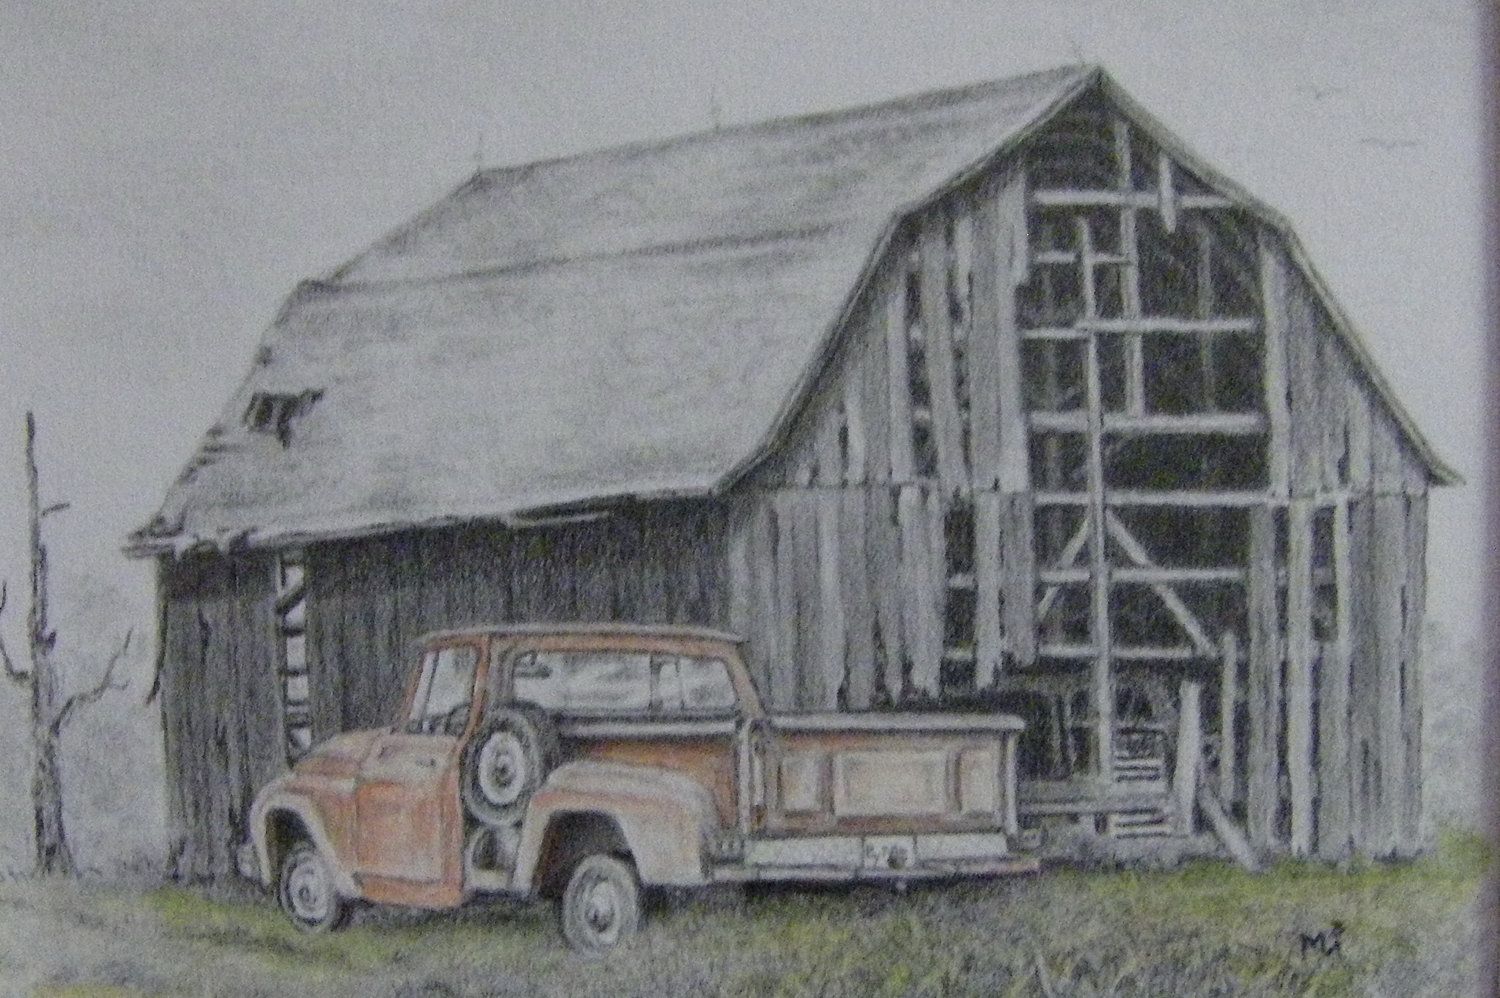 Old Farm Drawing at Explore collection of Old Farm